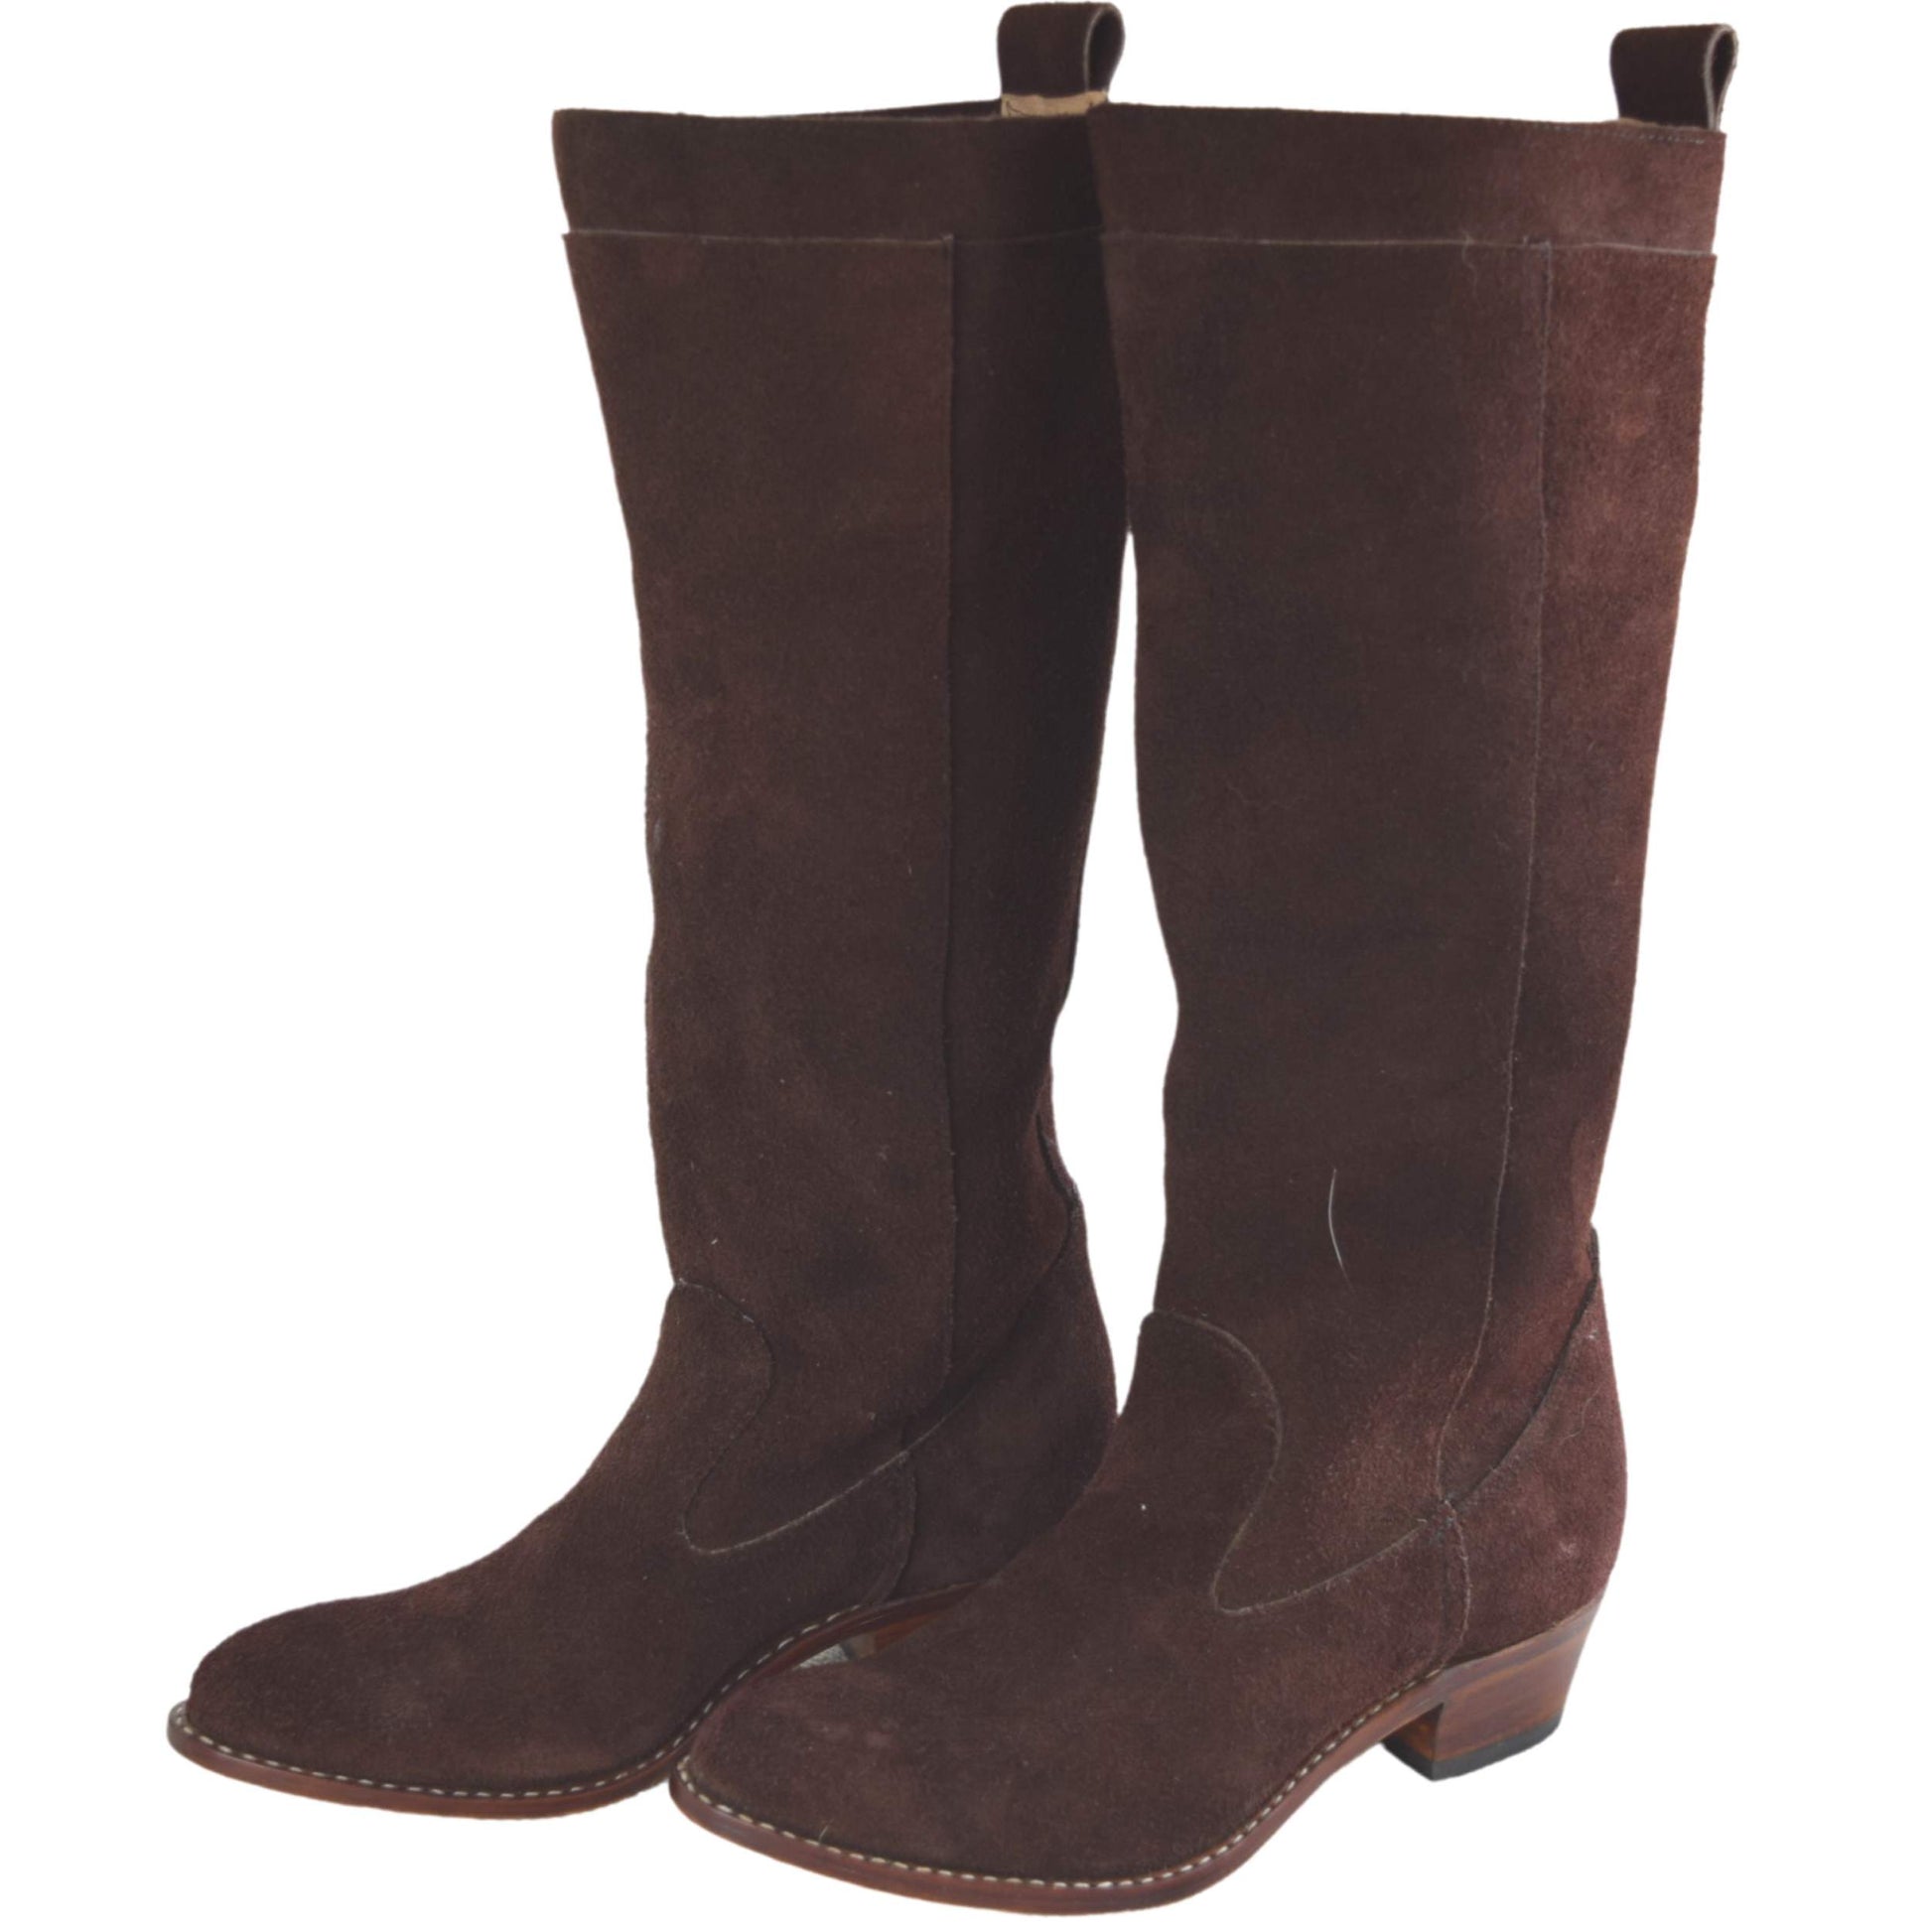 Brown Slouchy Suede Boots - Atitlan Leather